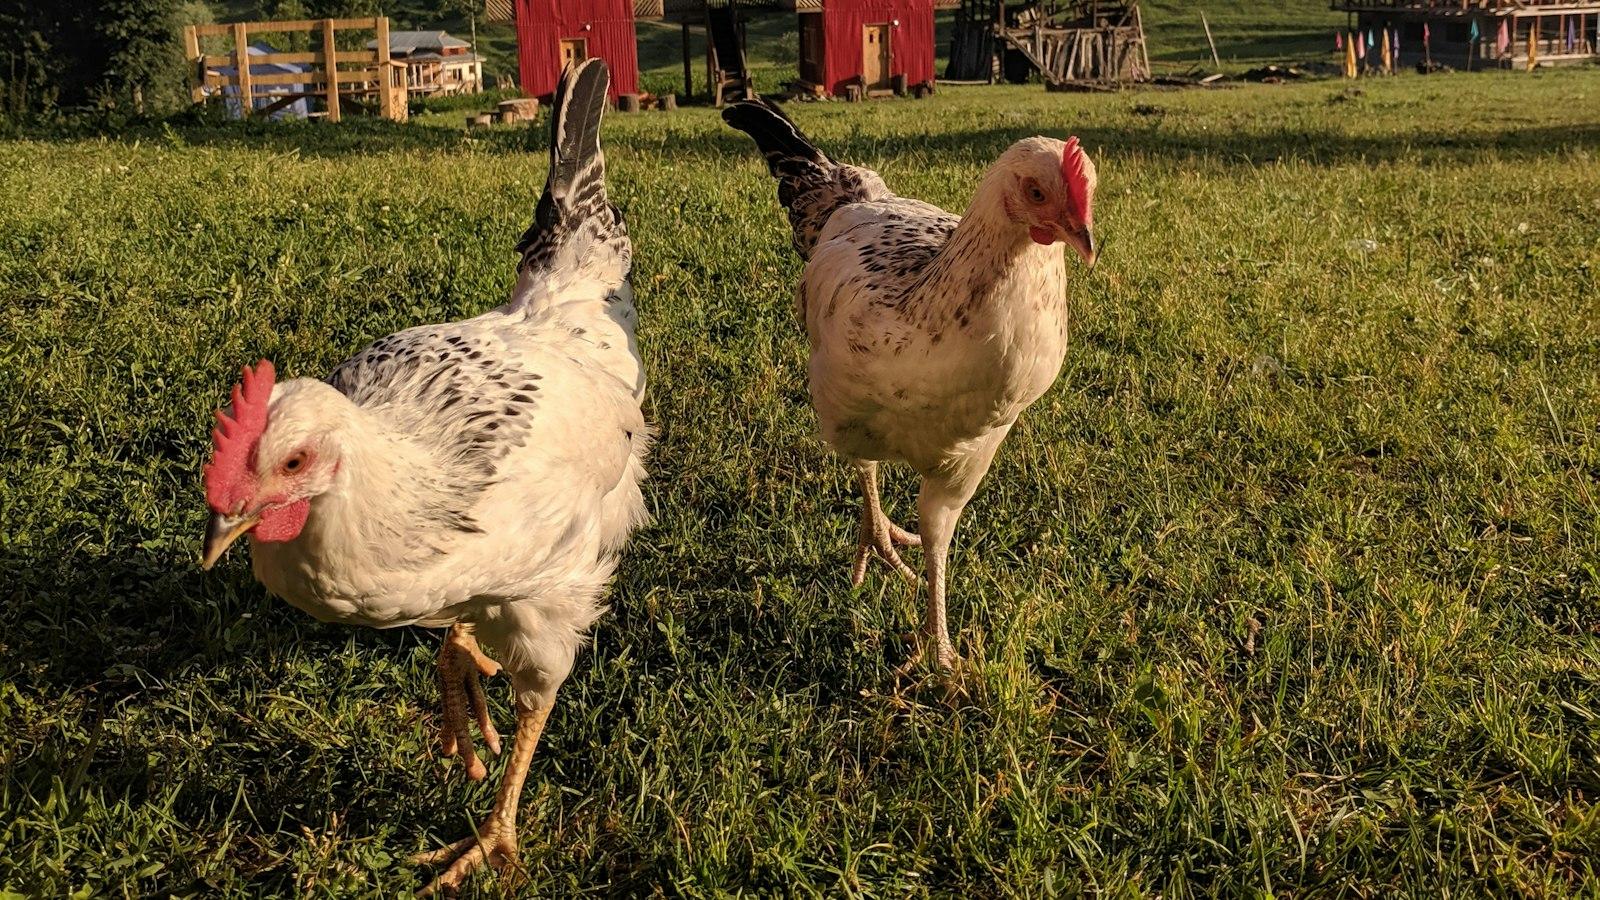 The Ultimate Guide to Building a Big Chicken Coop